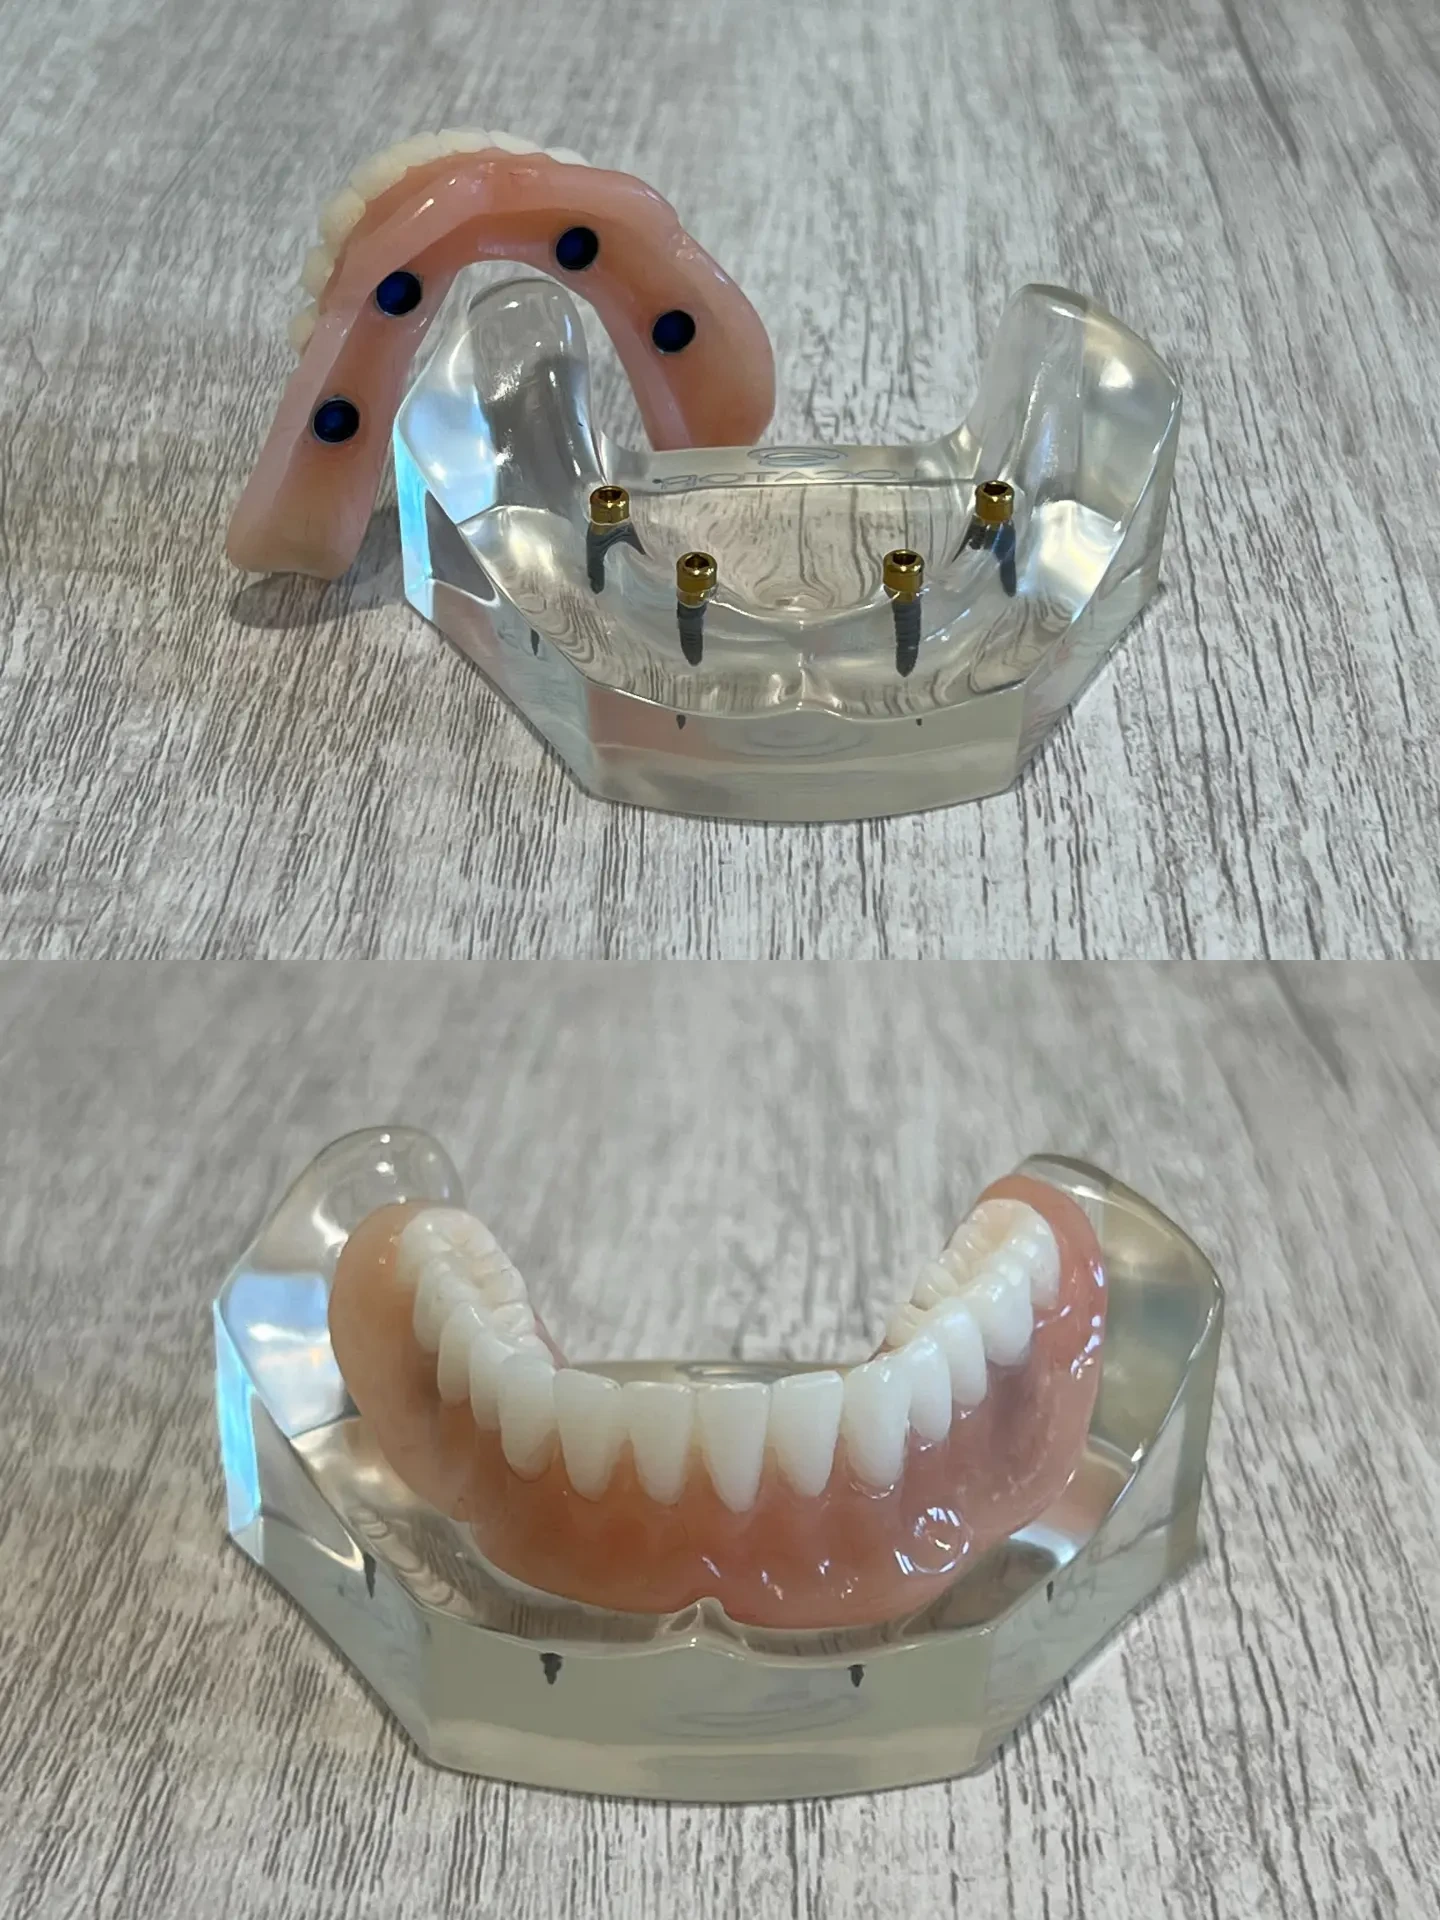 bottom snap in implant denture unsnapped and snapped